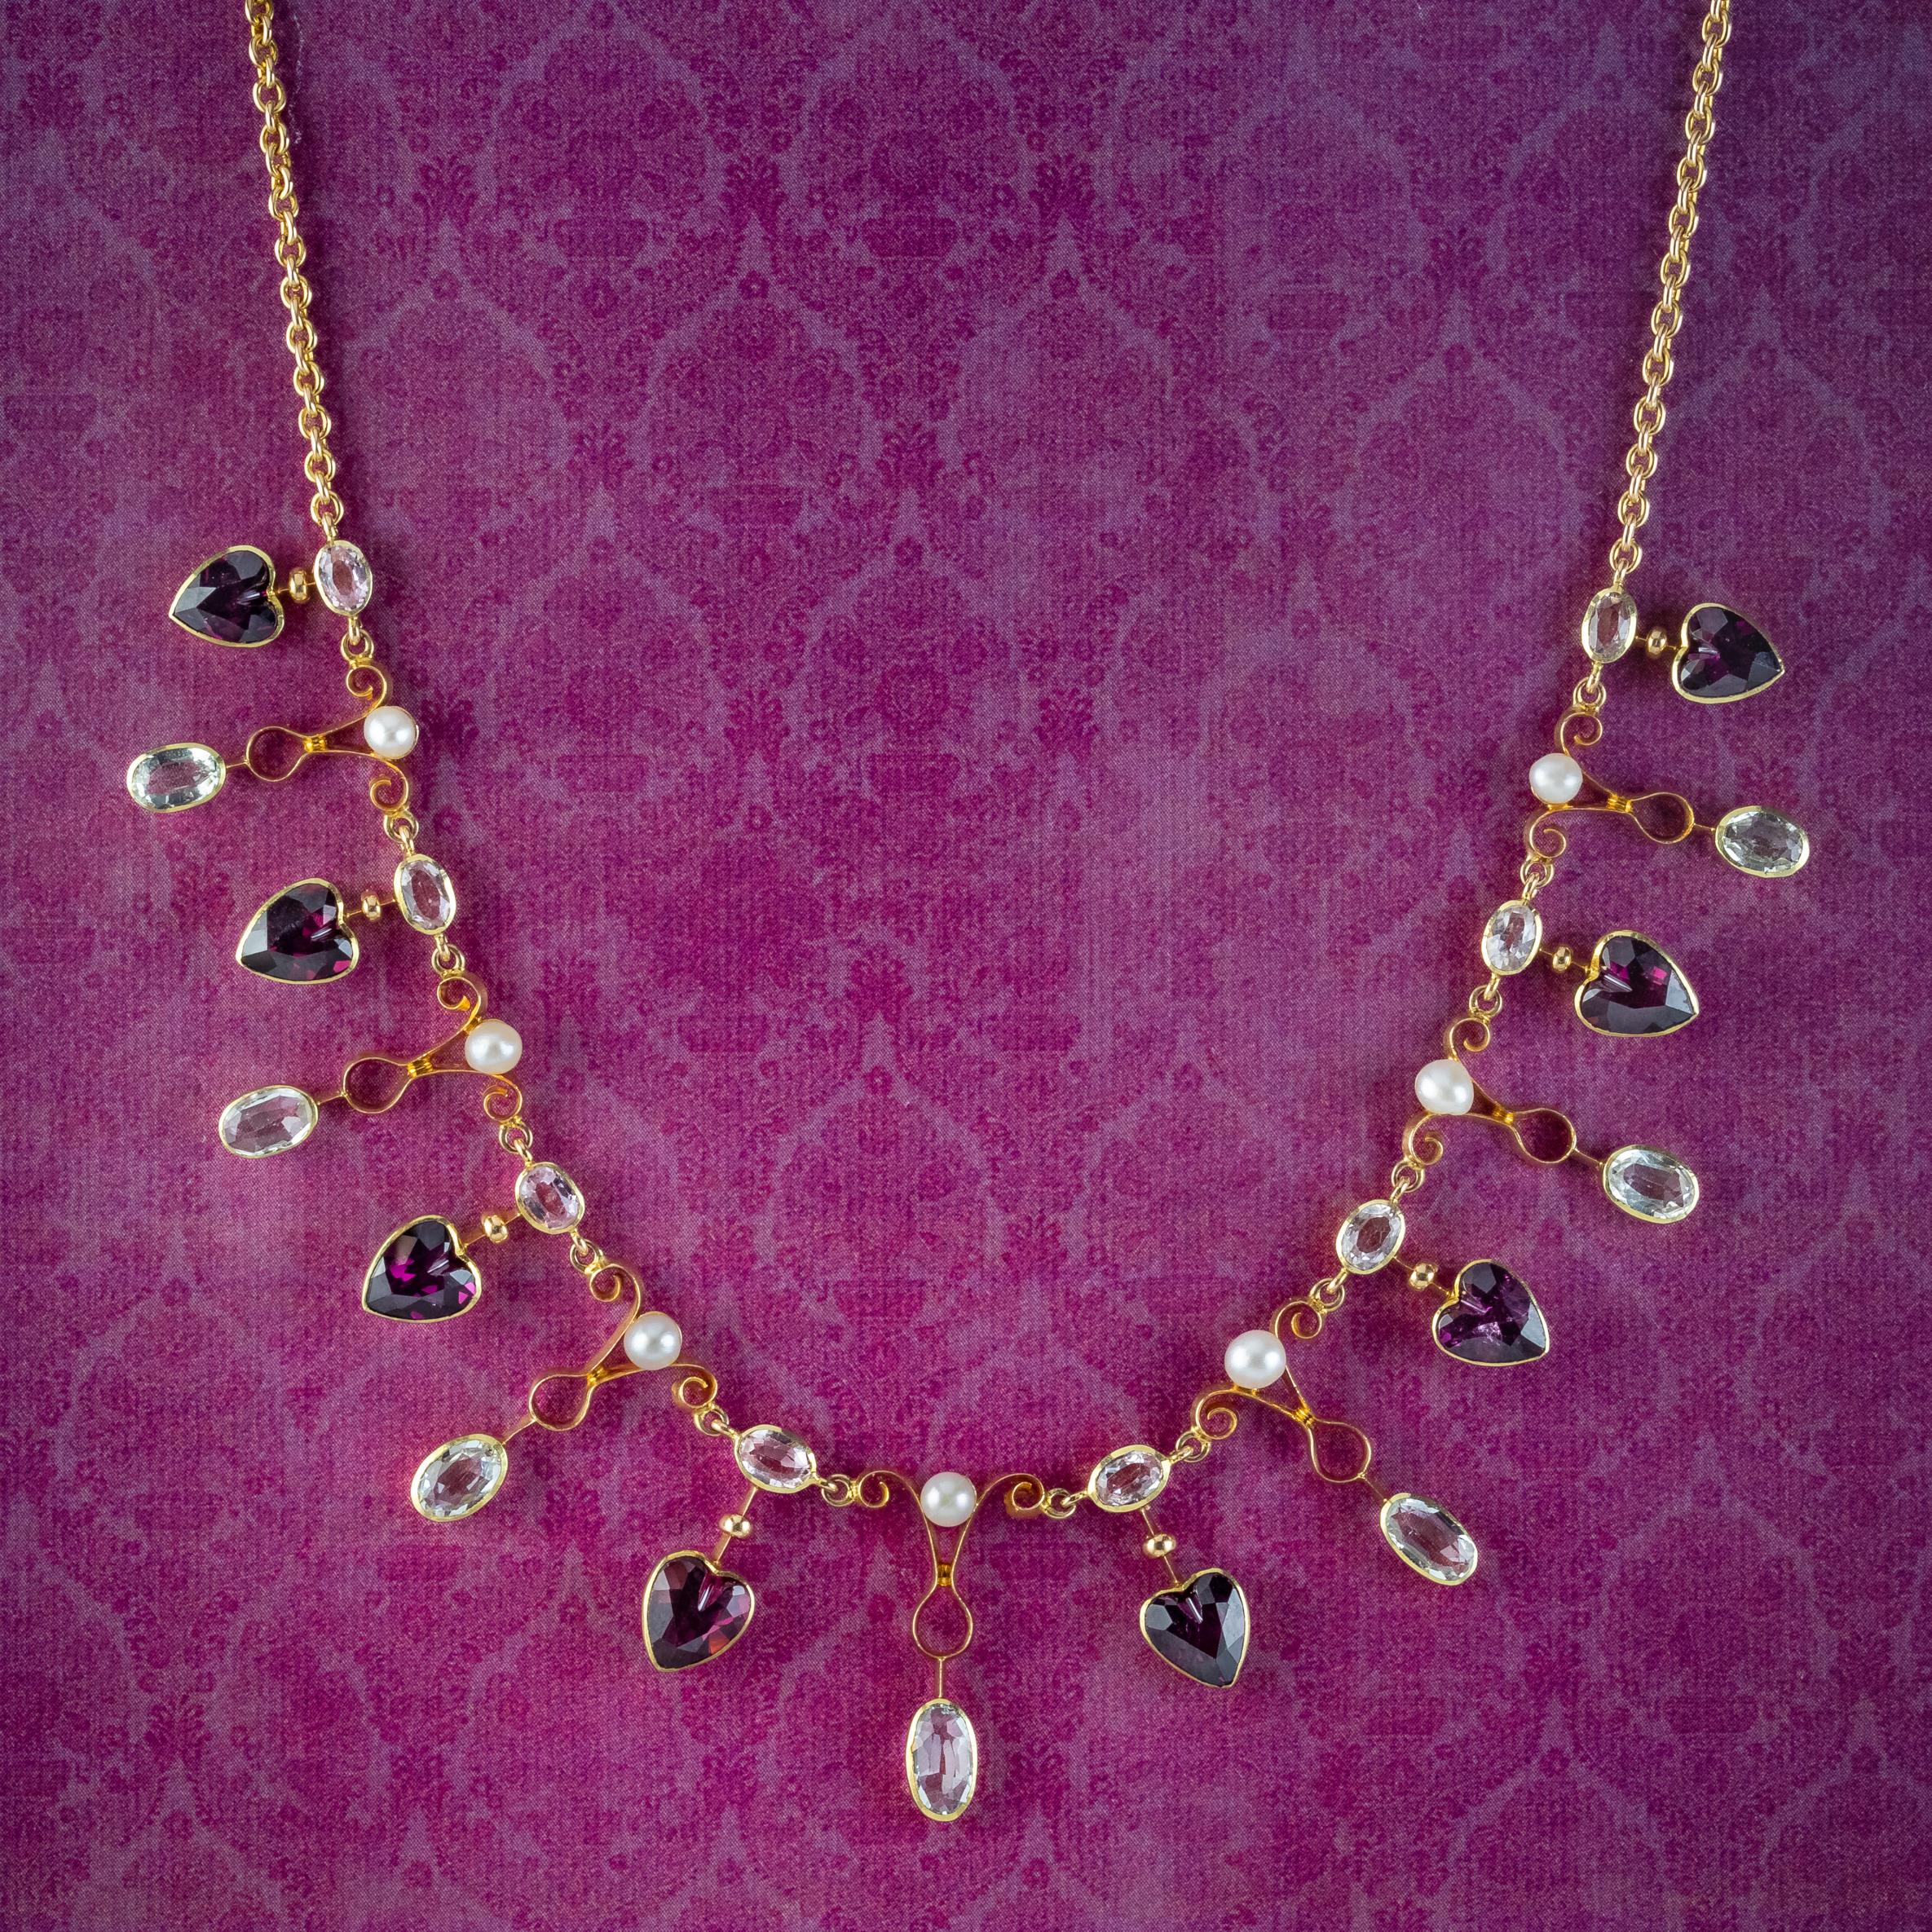 A magnificent antique Victorian dropper necklace from the late 19th Century adorned with fifteen droppers adorned with alternating blue oval cut aquamarines and violet almandine garnet hearts, with a line of white pearls and further aquas running